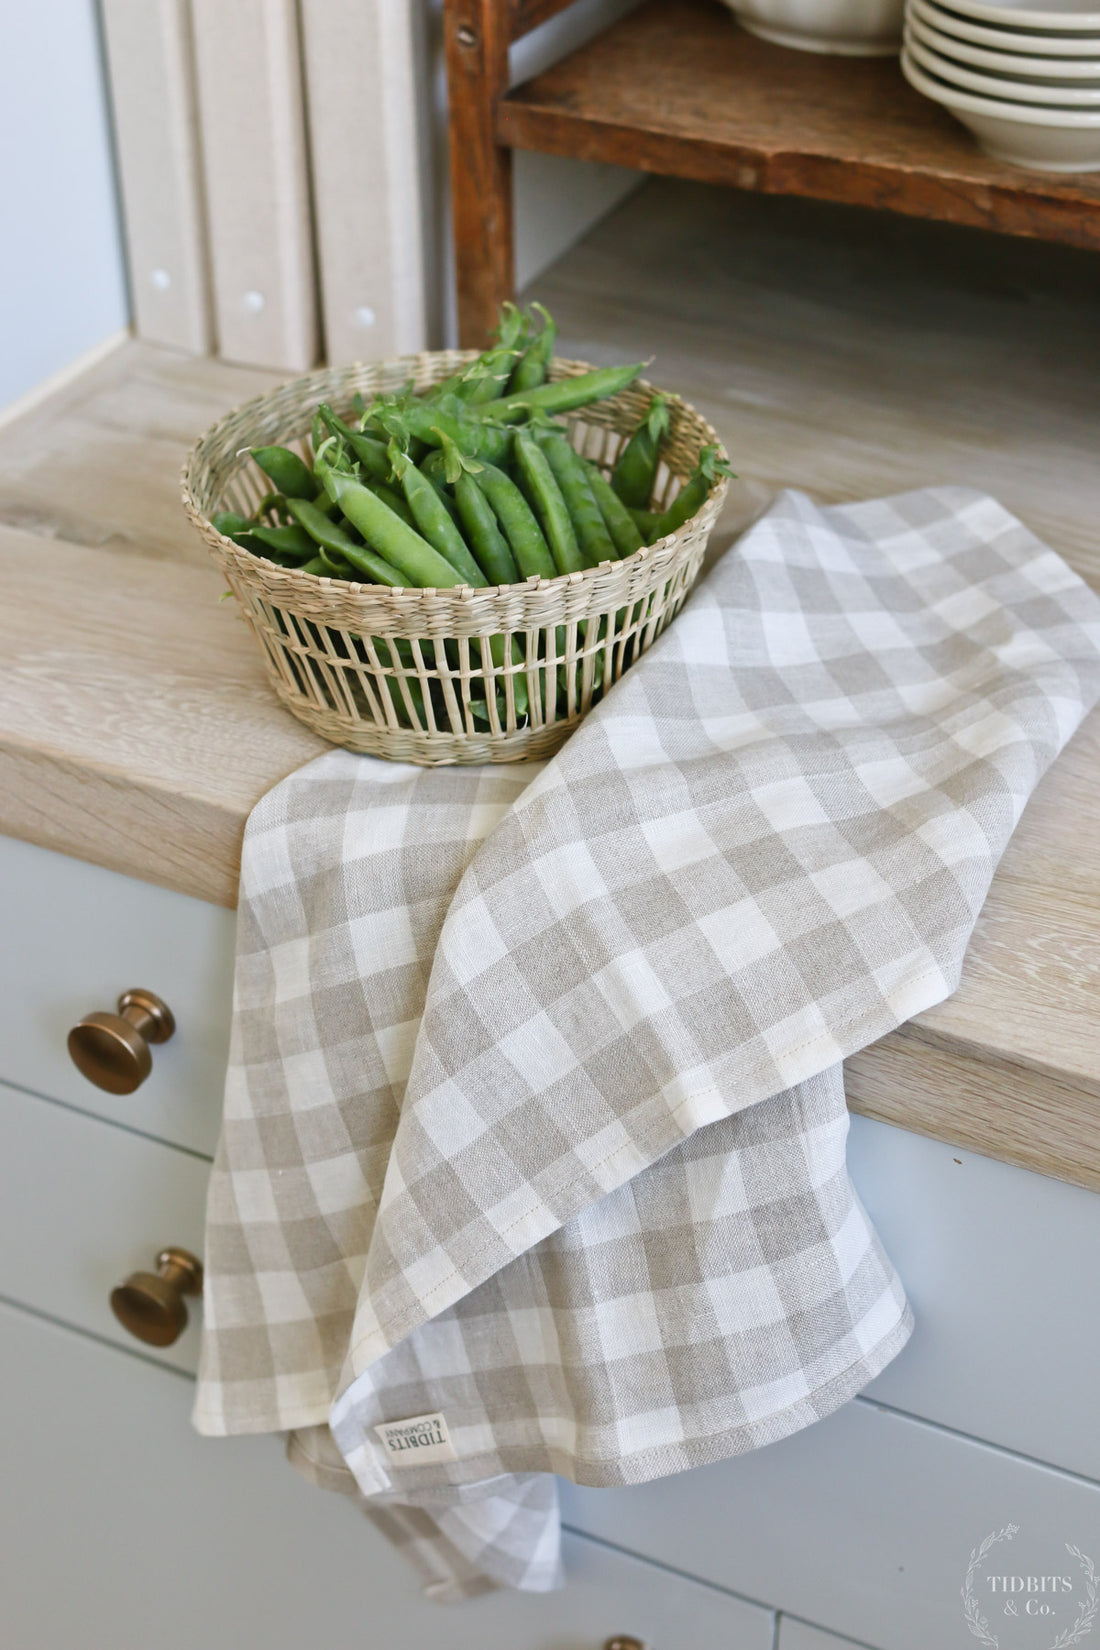 Washed linen Gingham Tea Towel Set, Linen Kitchen Towels White Red Check.  Pure linen dish towel, dishcloth. Christmas gifts. Kitchen linen